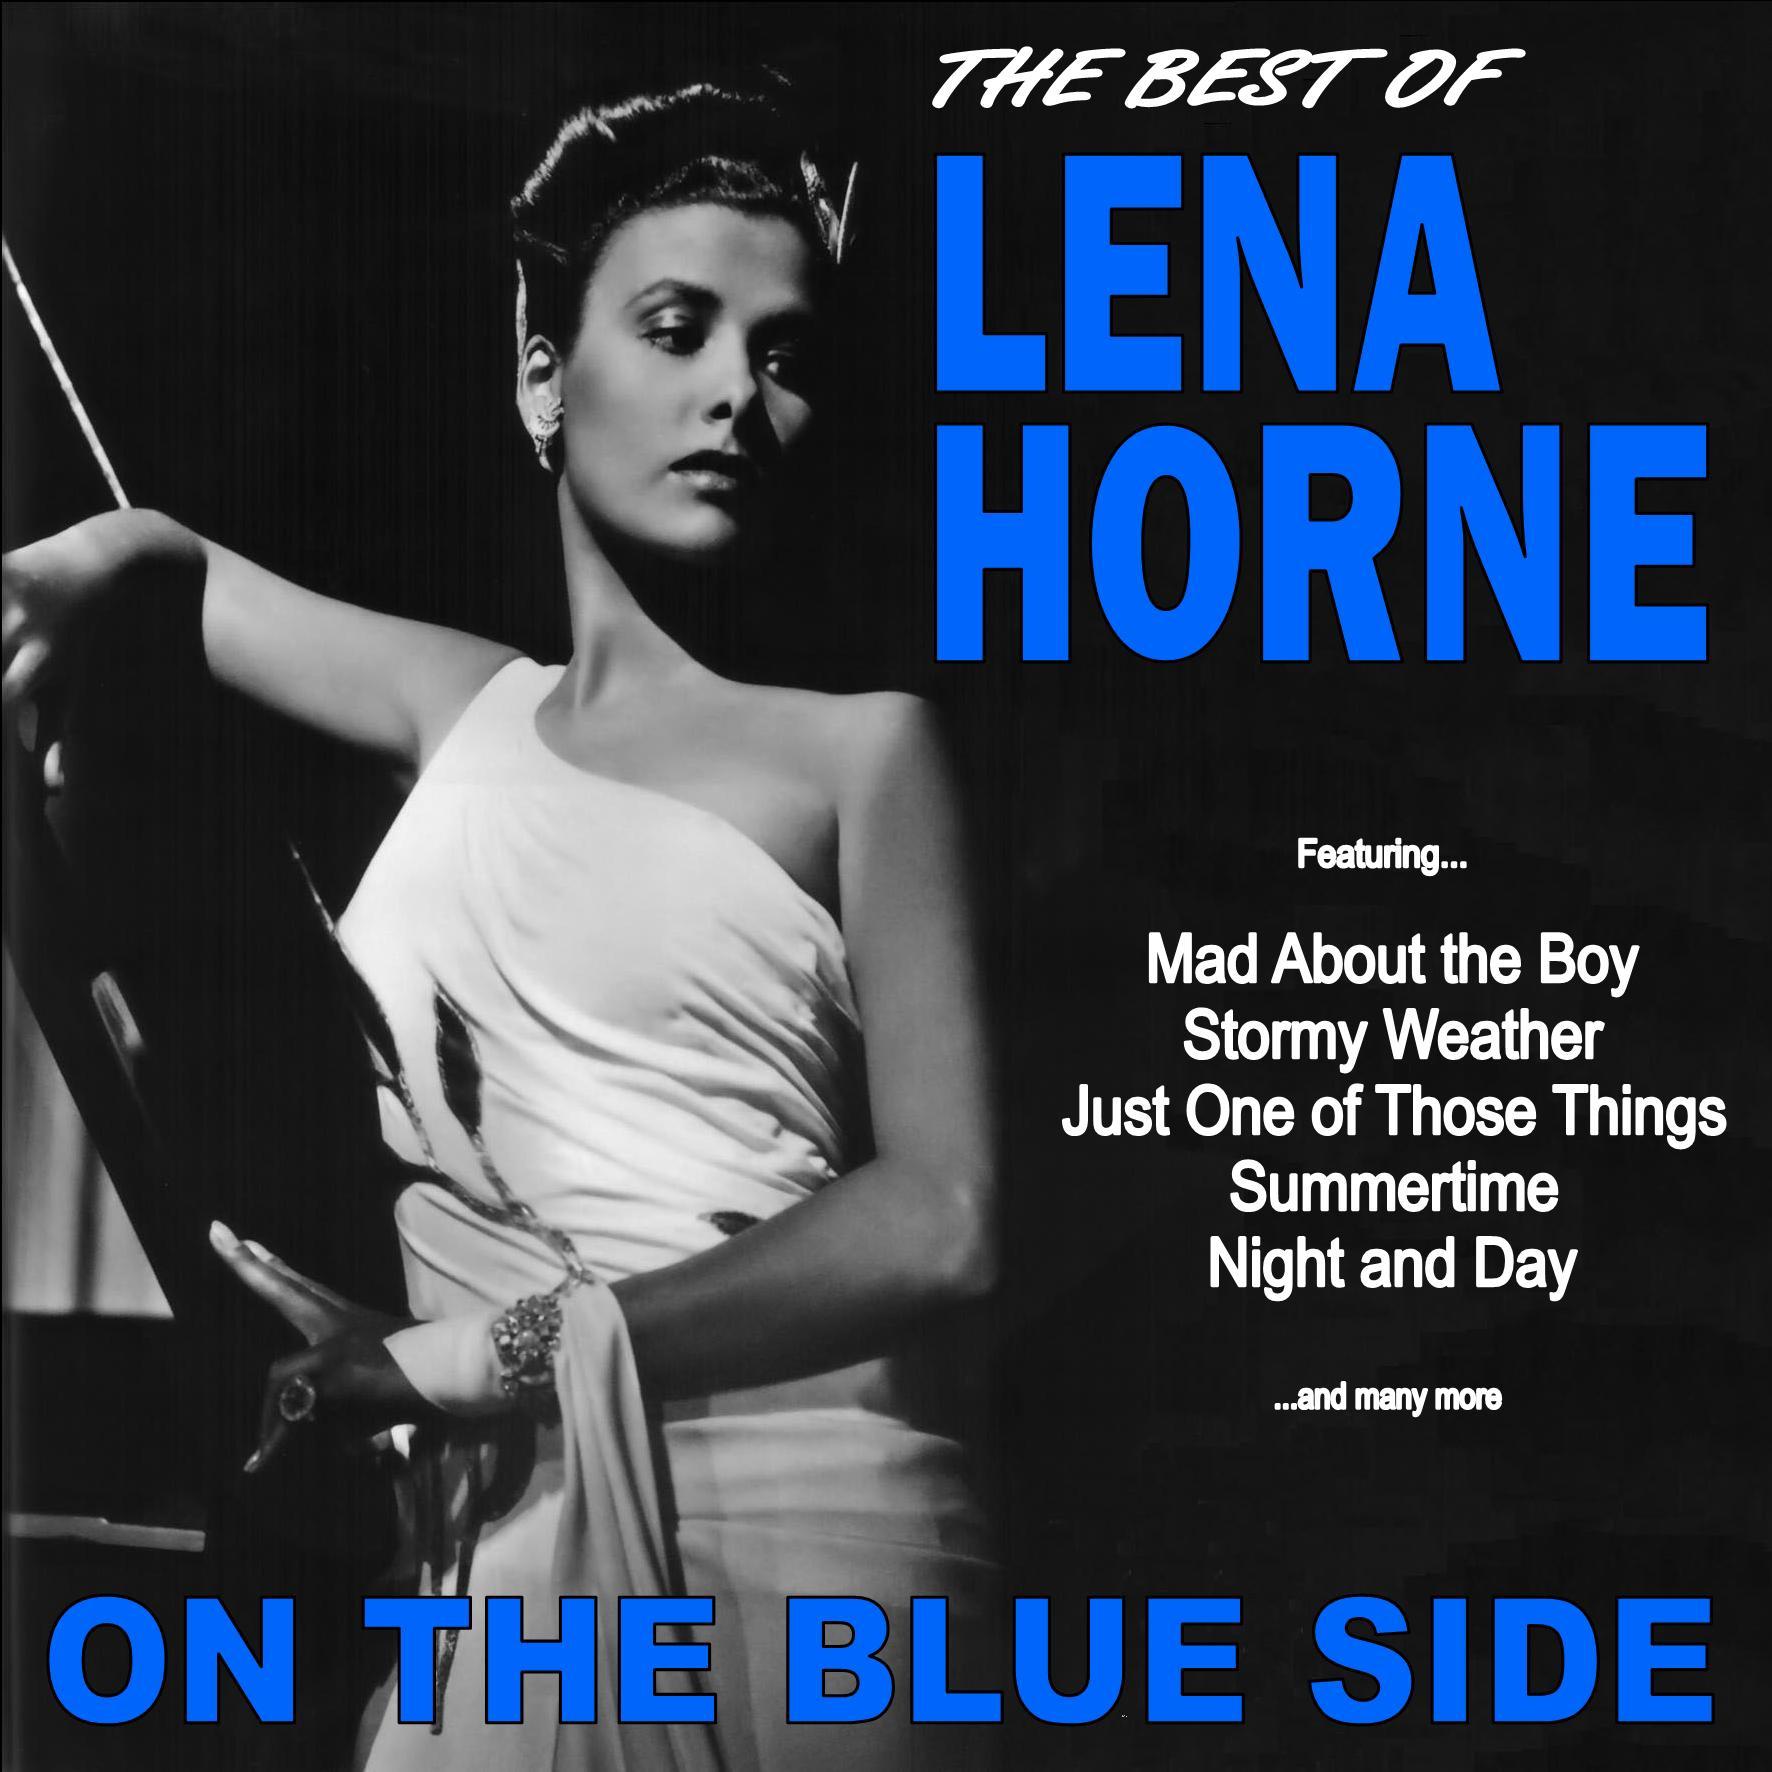 On the Blue Side: The Best of Lena Horne